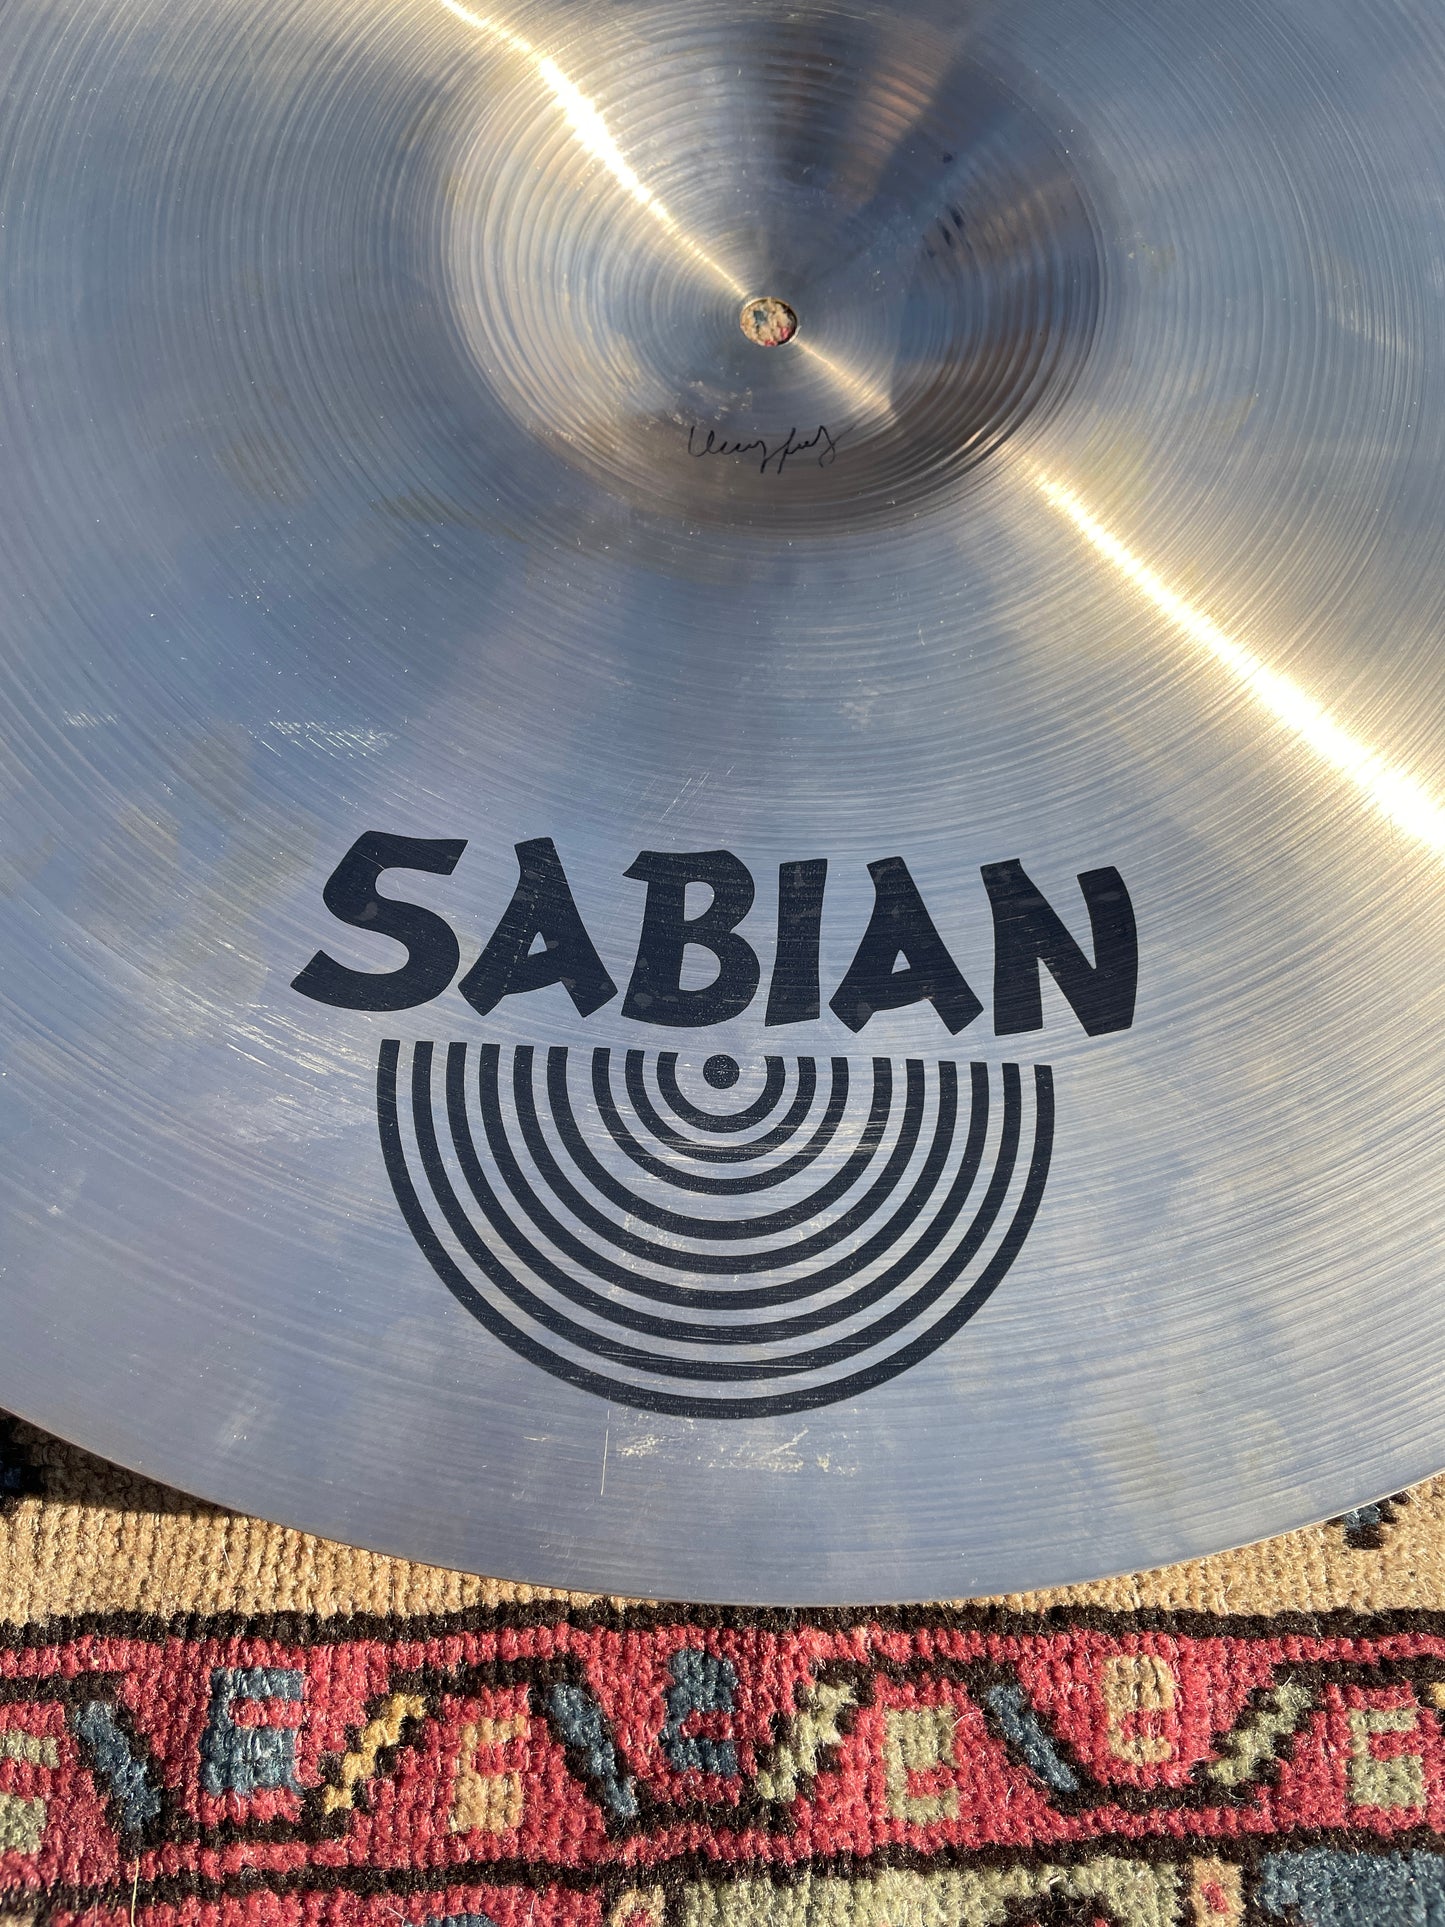 21" Sabian Hand Hammered HH Vintage Ride Cymbal 2258g